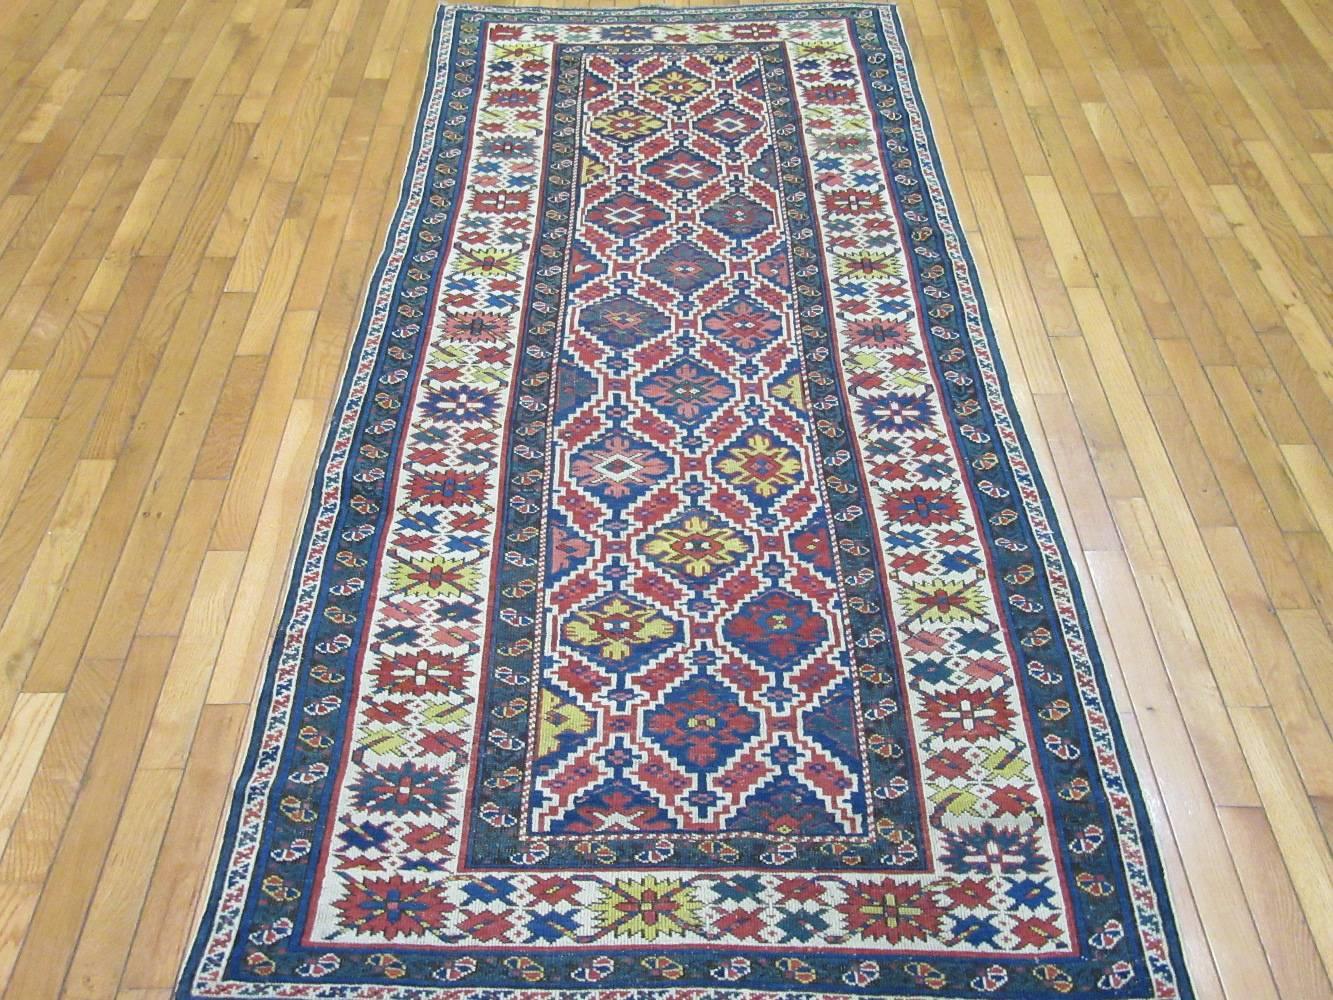 This is an antique hand-knotted short runner rug from the village of Shirvan in the Caucuses. Shirvans are among the better quality weave Caucasian rugs. It has a repetitive all over geometric pattern on a blue color field. The rug measures 3' 6'' x